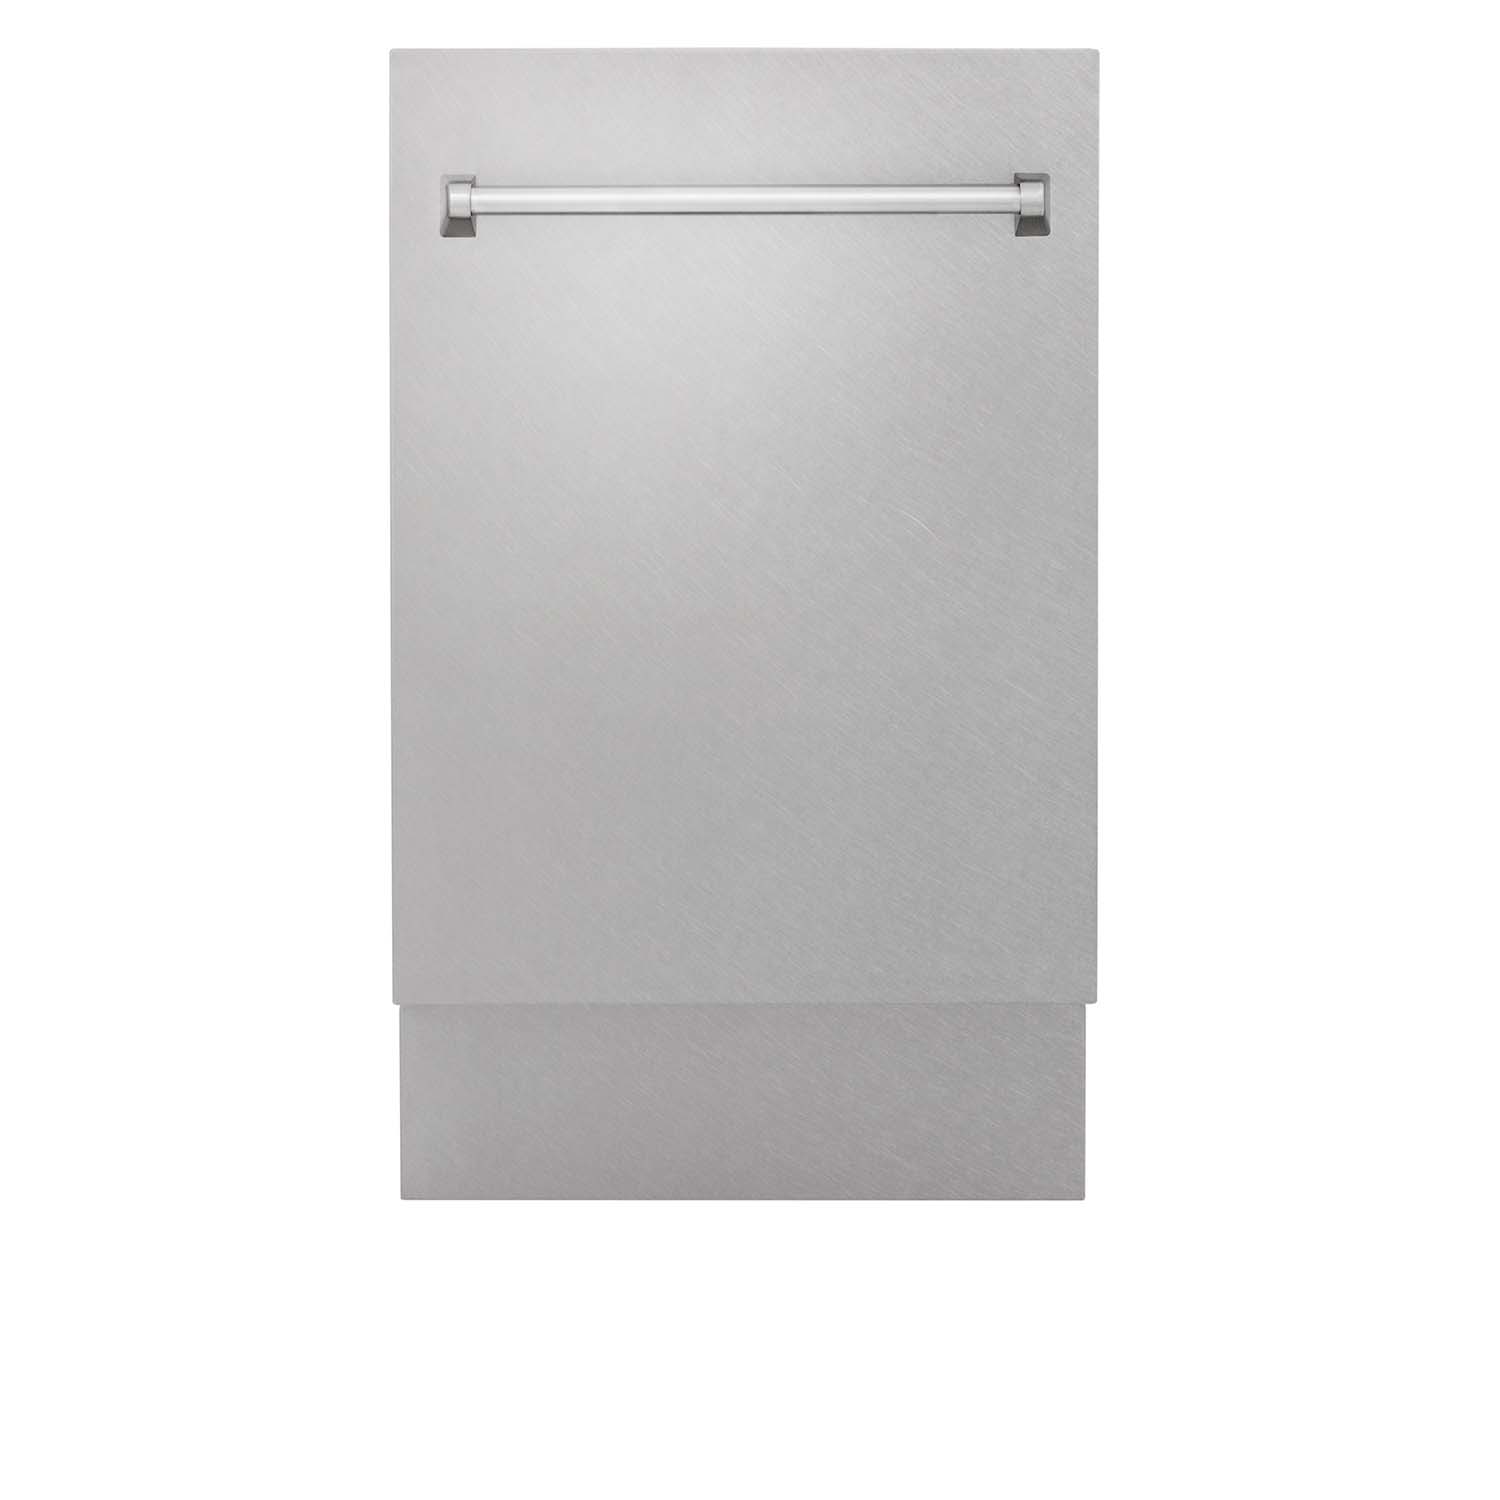 ZLINE 18" Tallac Series Dishwasher with DuraSnow Stainless Steel panel front.